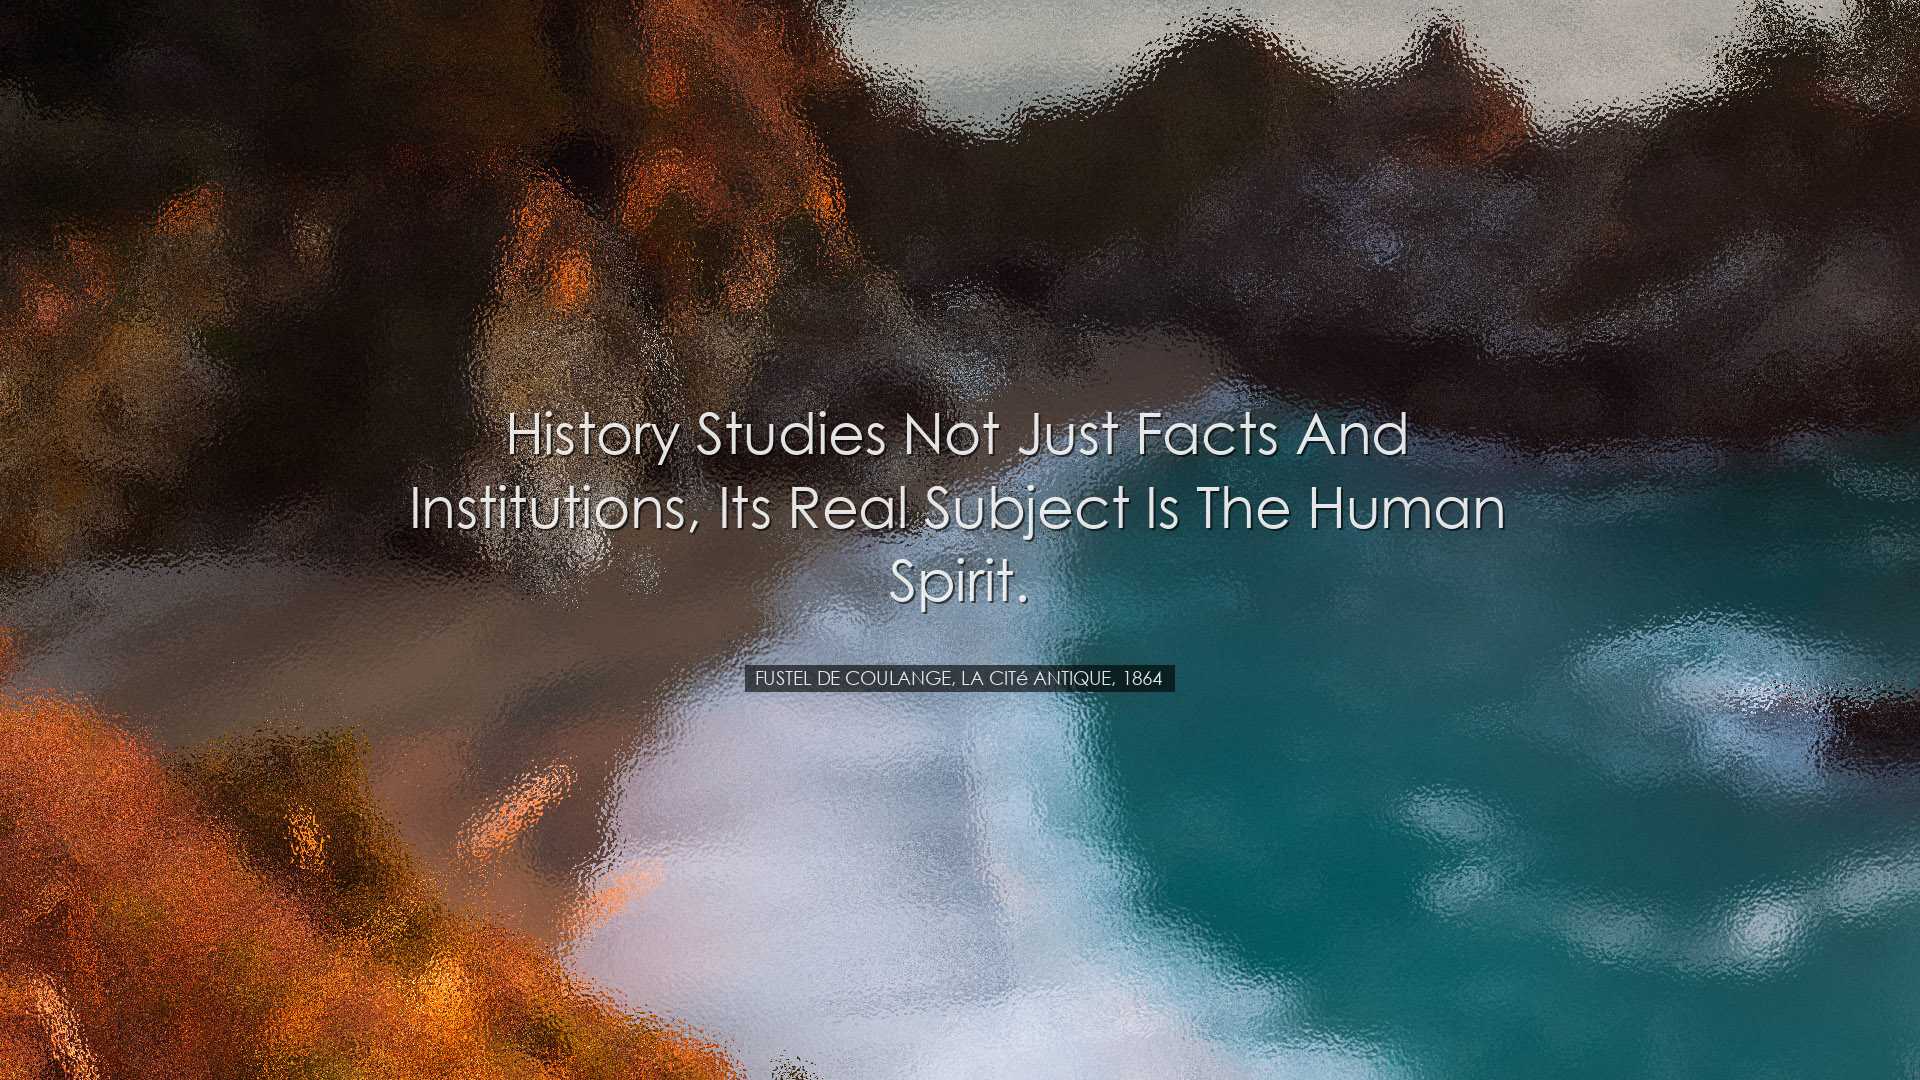 History studies not just facts and institutions, its real subject